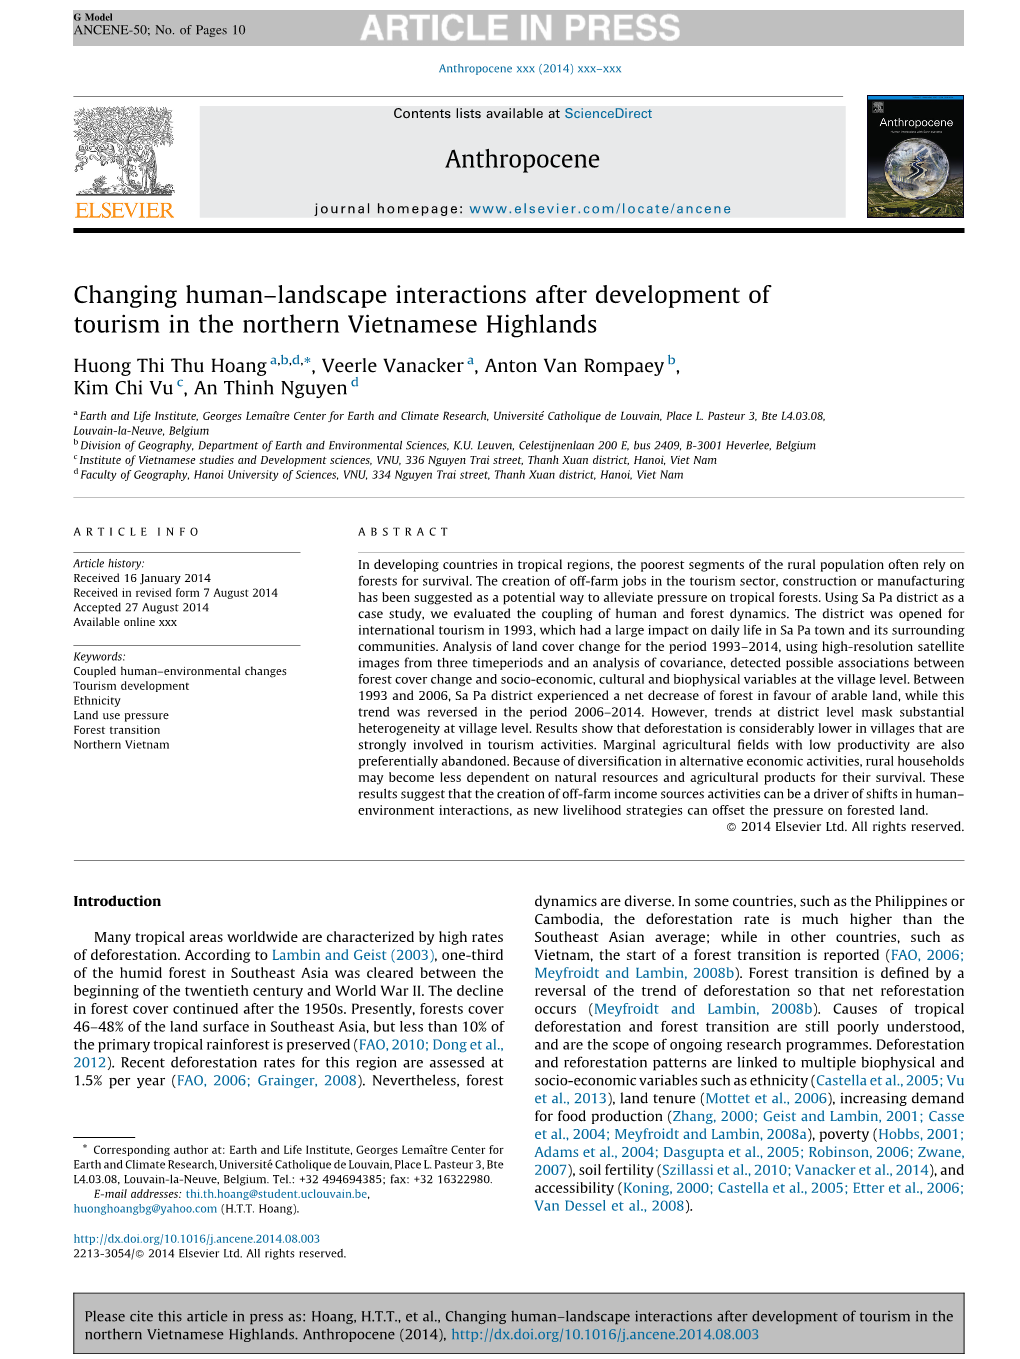 Changing Human–Landscape Interactions After Development Of